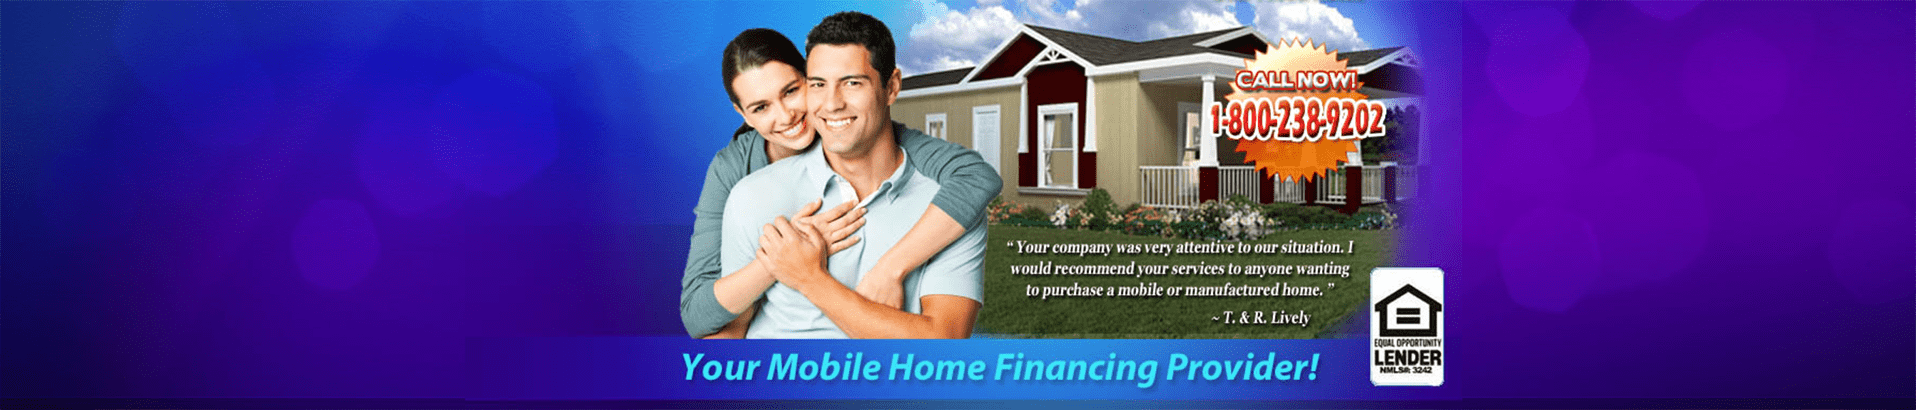 Mobile Home Loan Products & Programs